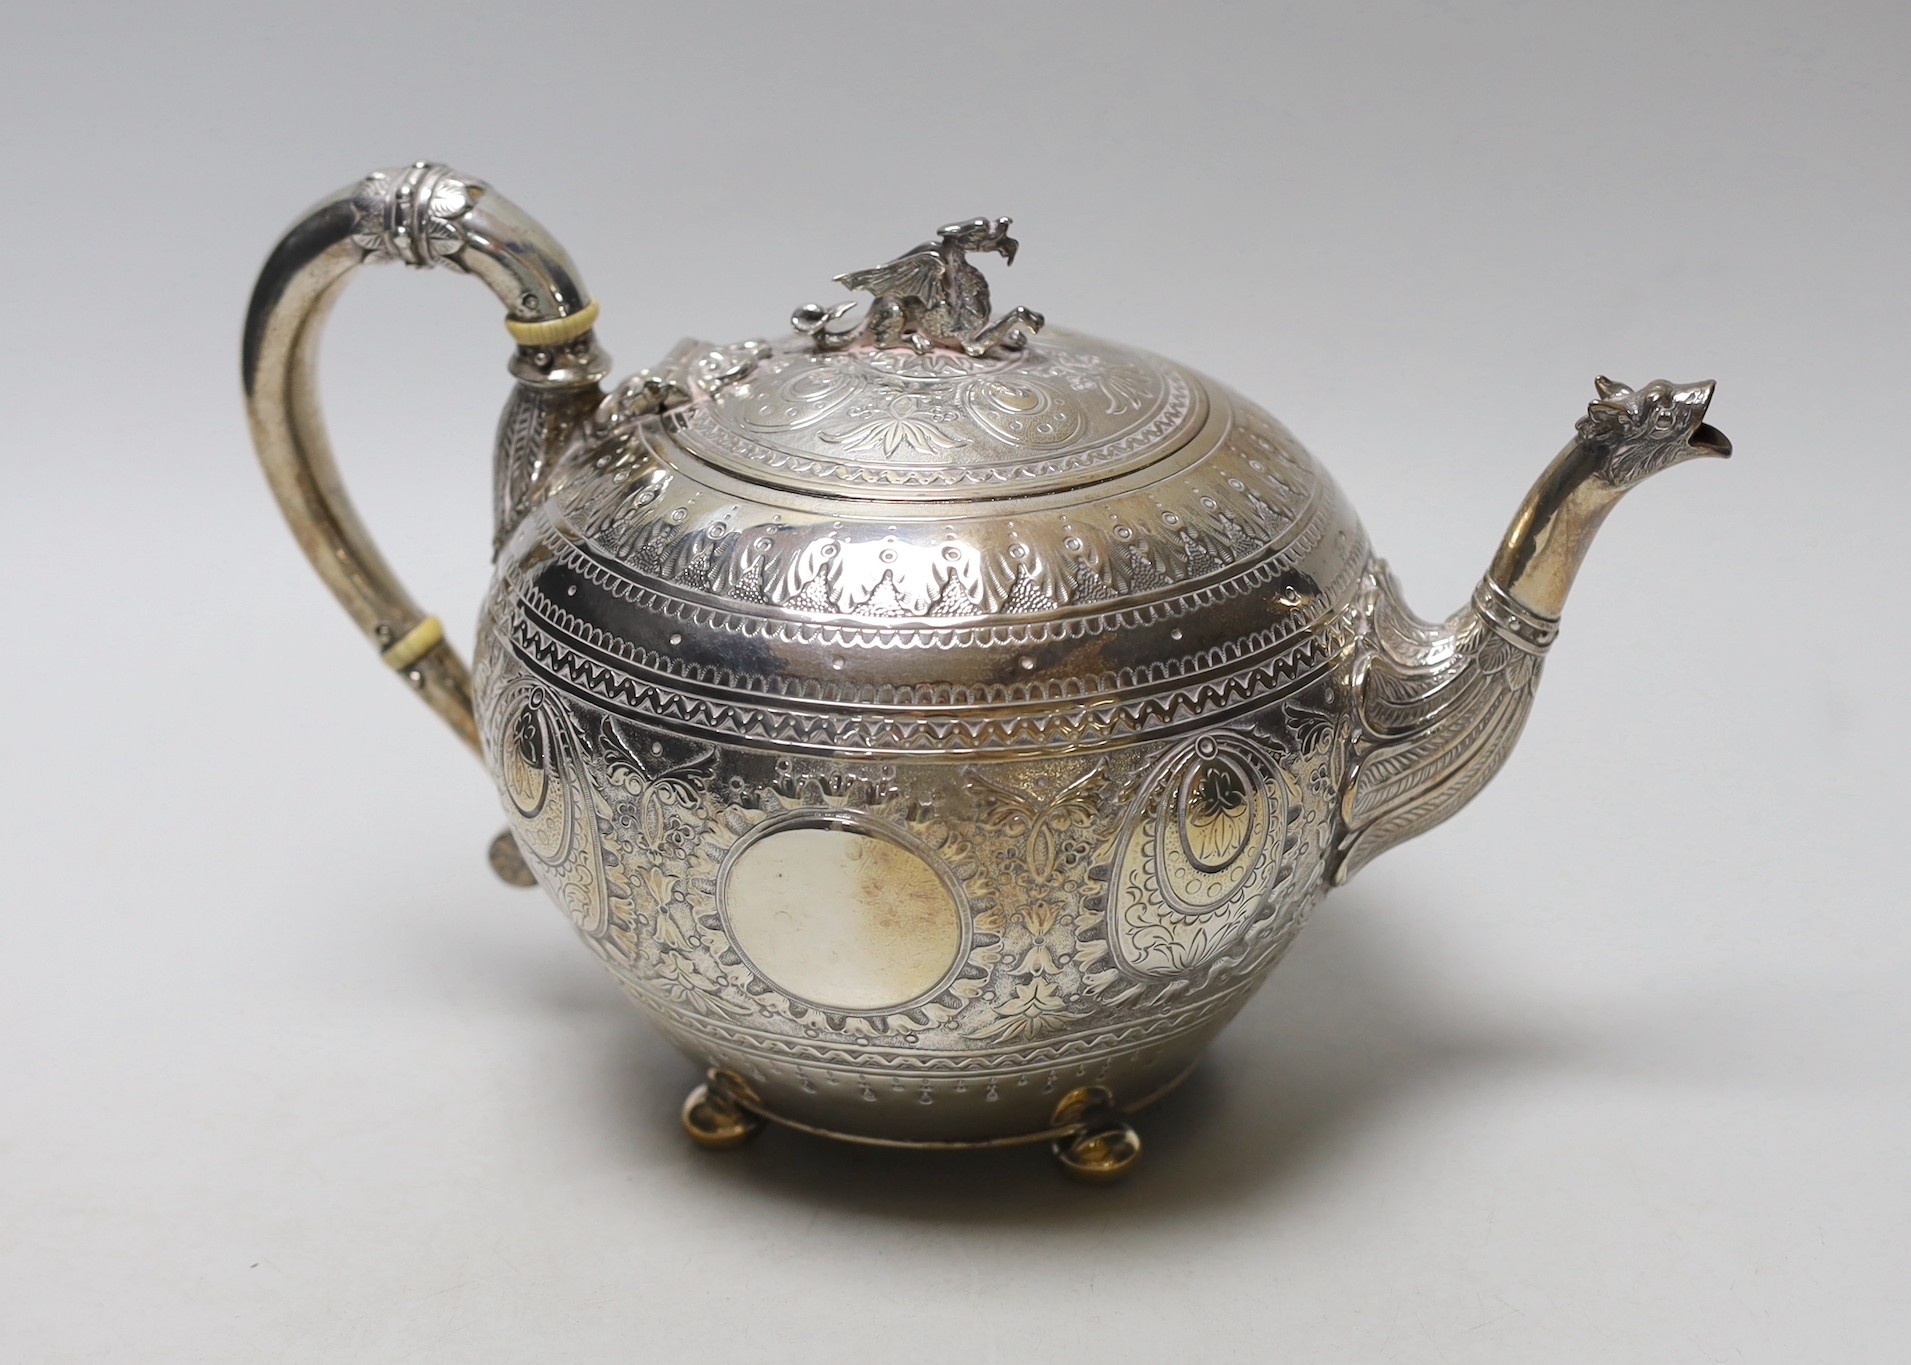 A Victorian embossed silver globular teapot, by William & John Barnard, London, 1893, with dragon finial and mask spout, gross weight 22.1oz.